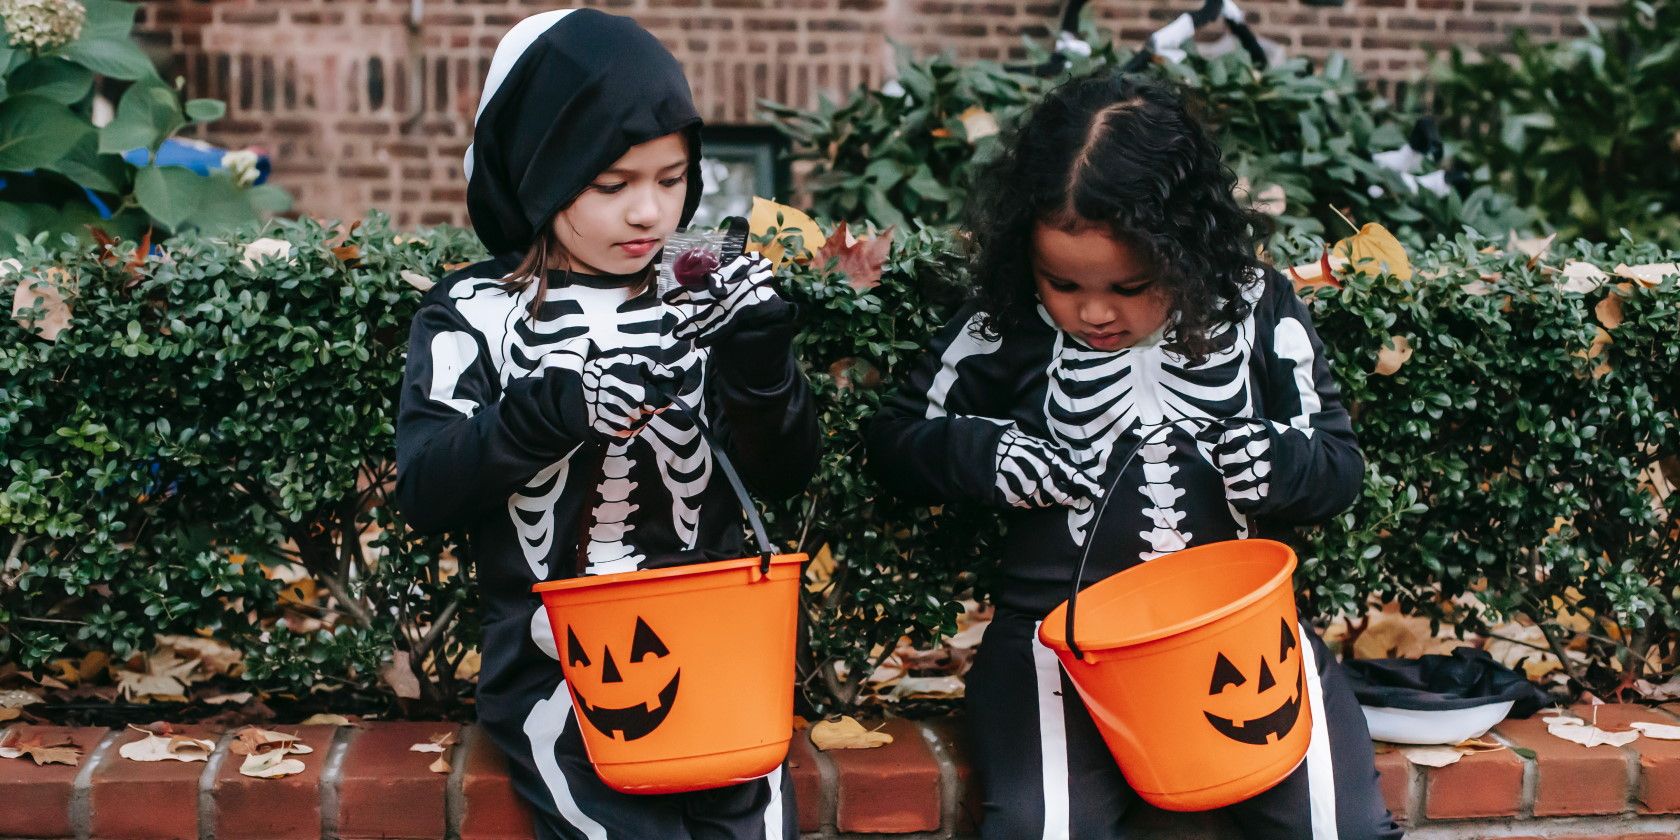 Two children wearing skeleton costumes eating Halloween candy